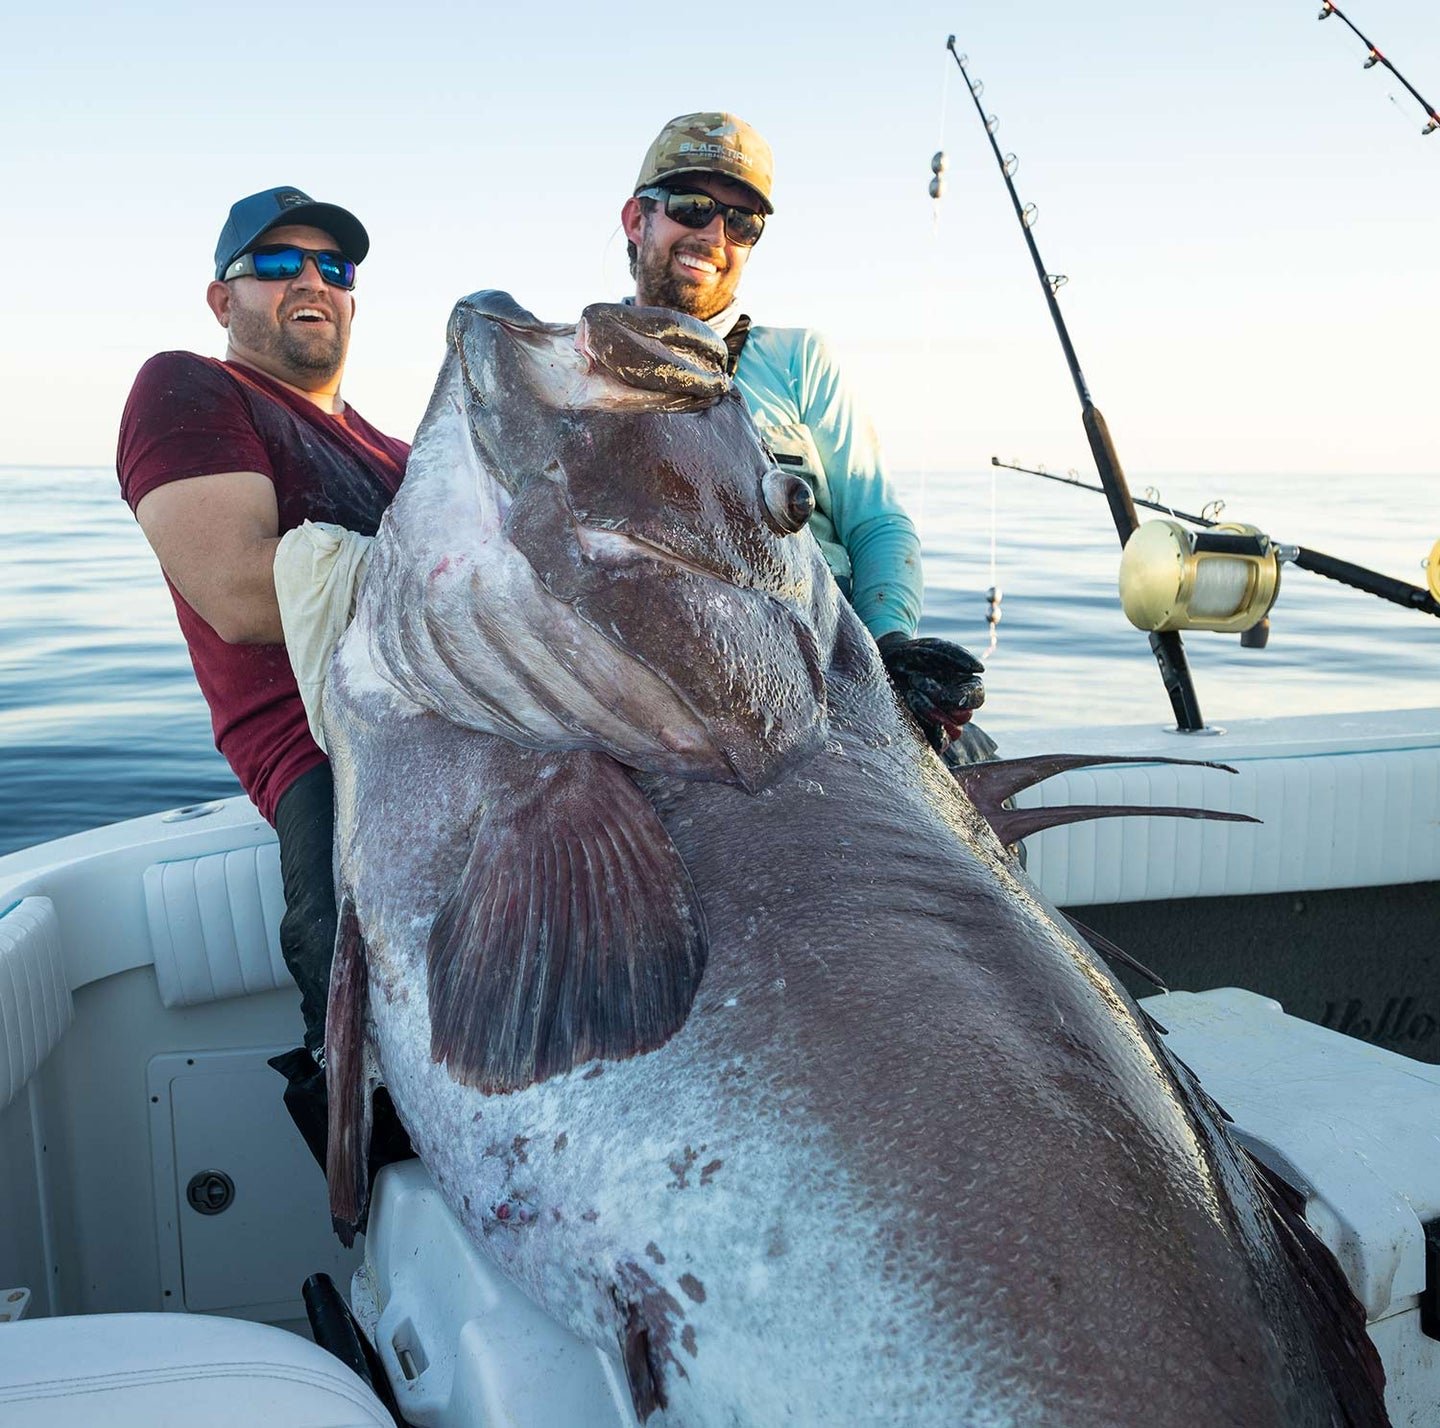 This 300-pound grouper went toe-to-toe with four grown men